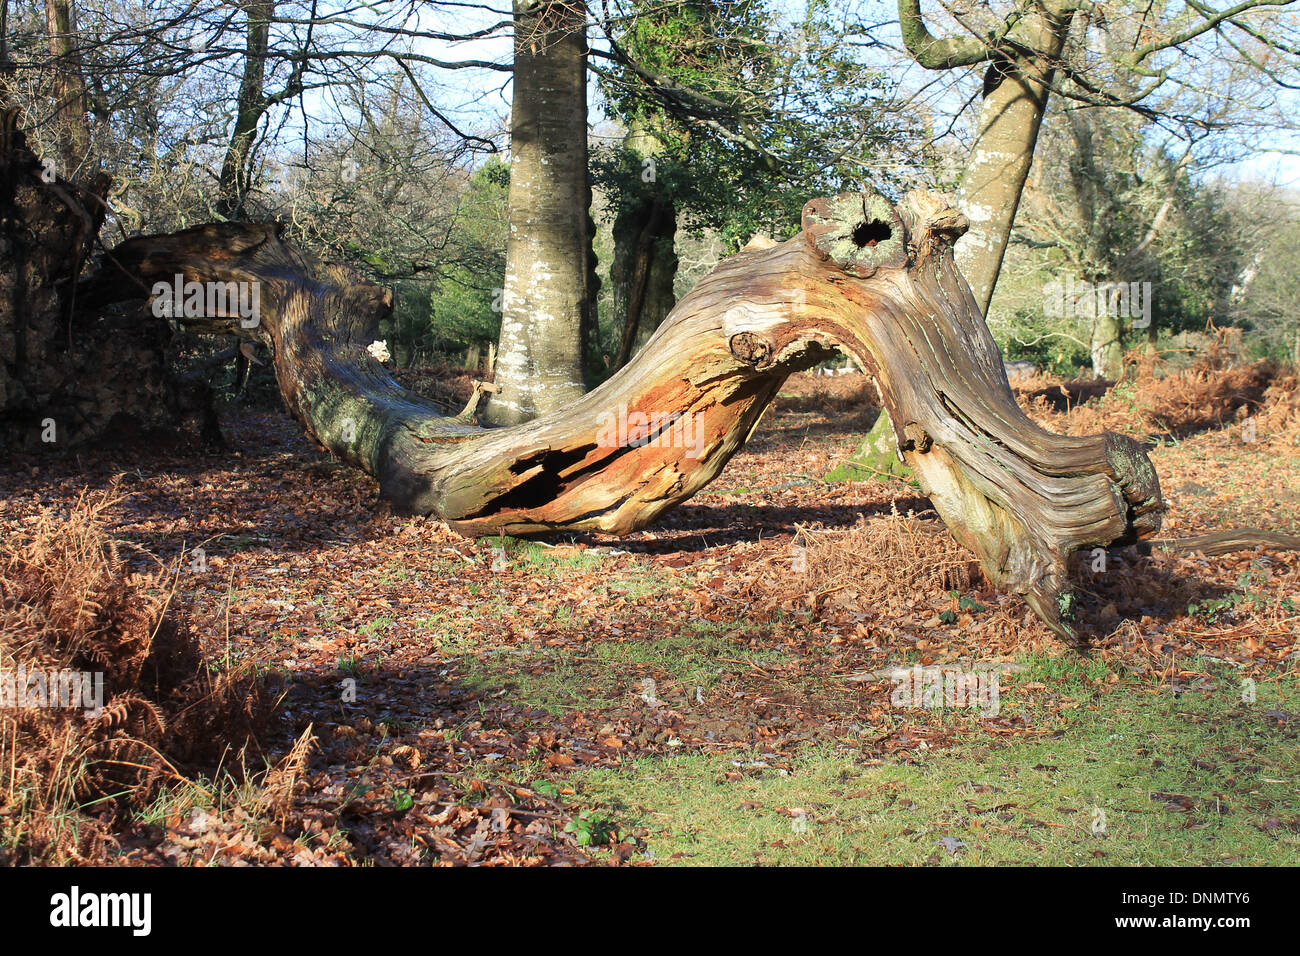 Fallen tree making a beautiful natural sculpture of a sinuous dragon in the New Forest National Park, Hampshire, UK Stock Photo